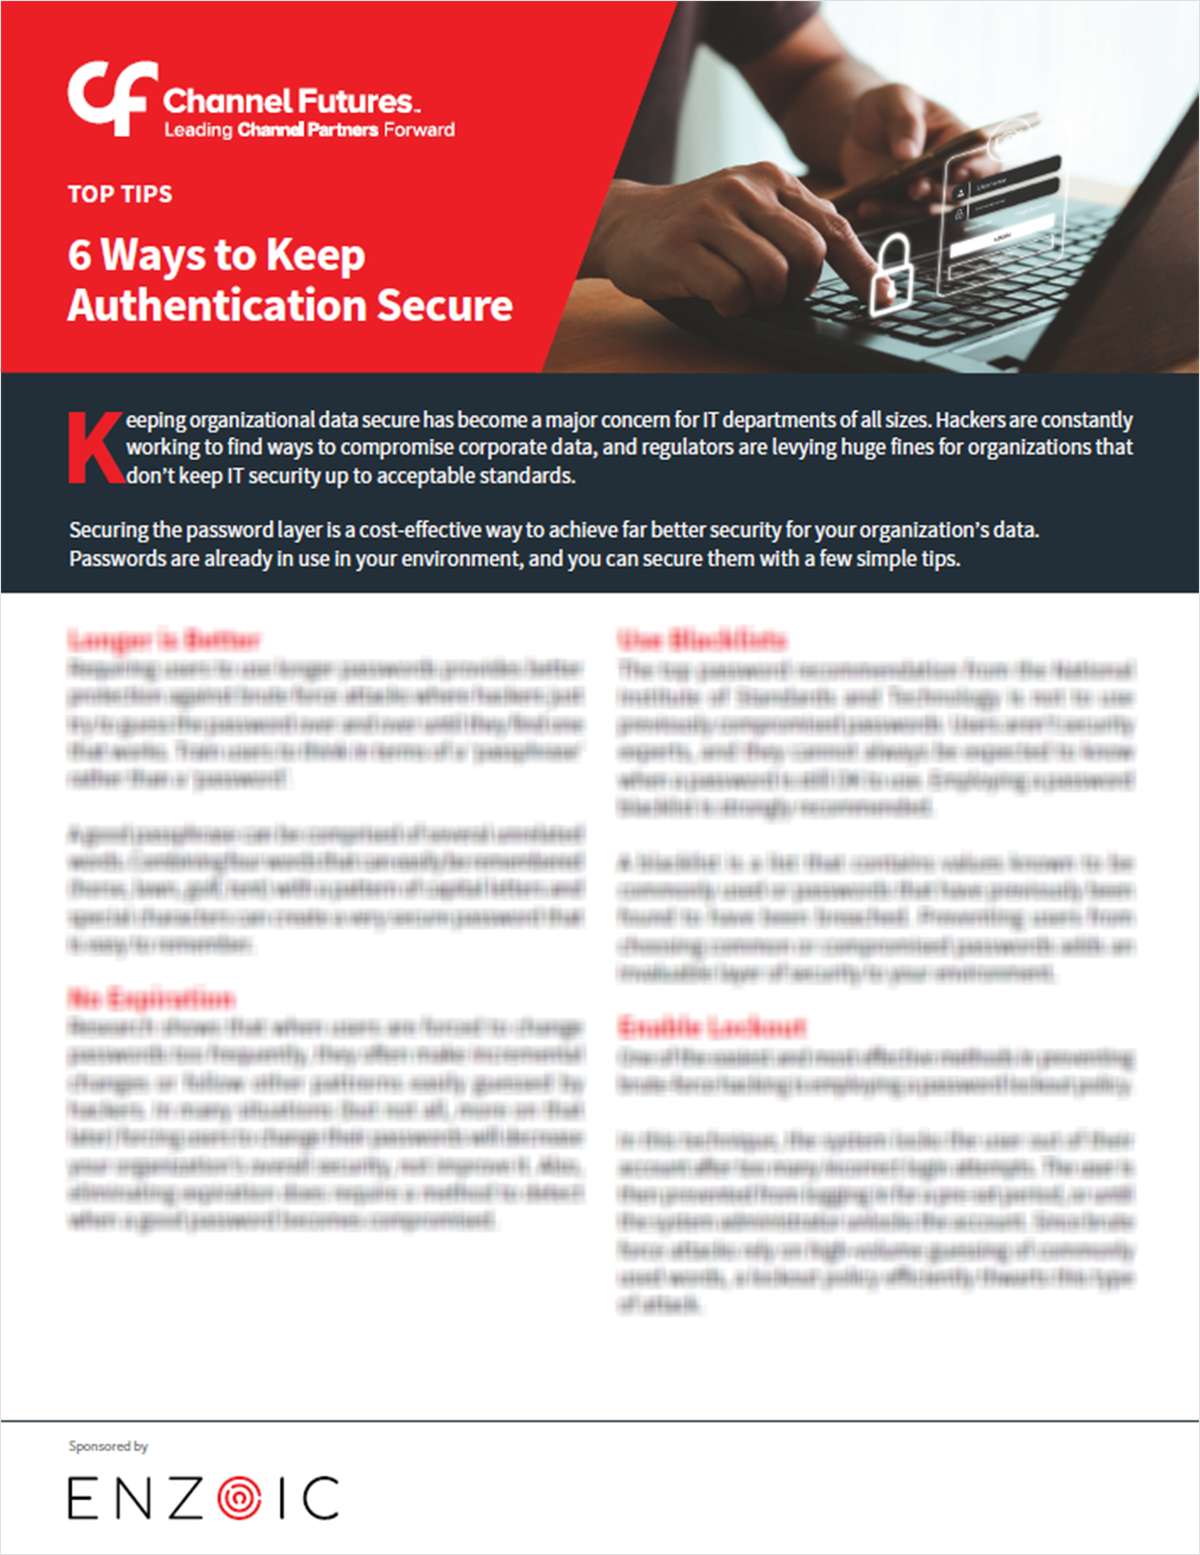 6 Ways to Keep Authentication Secure